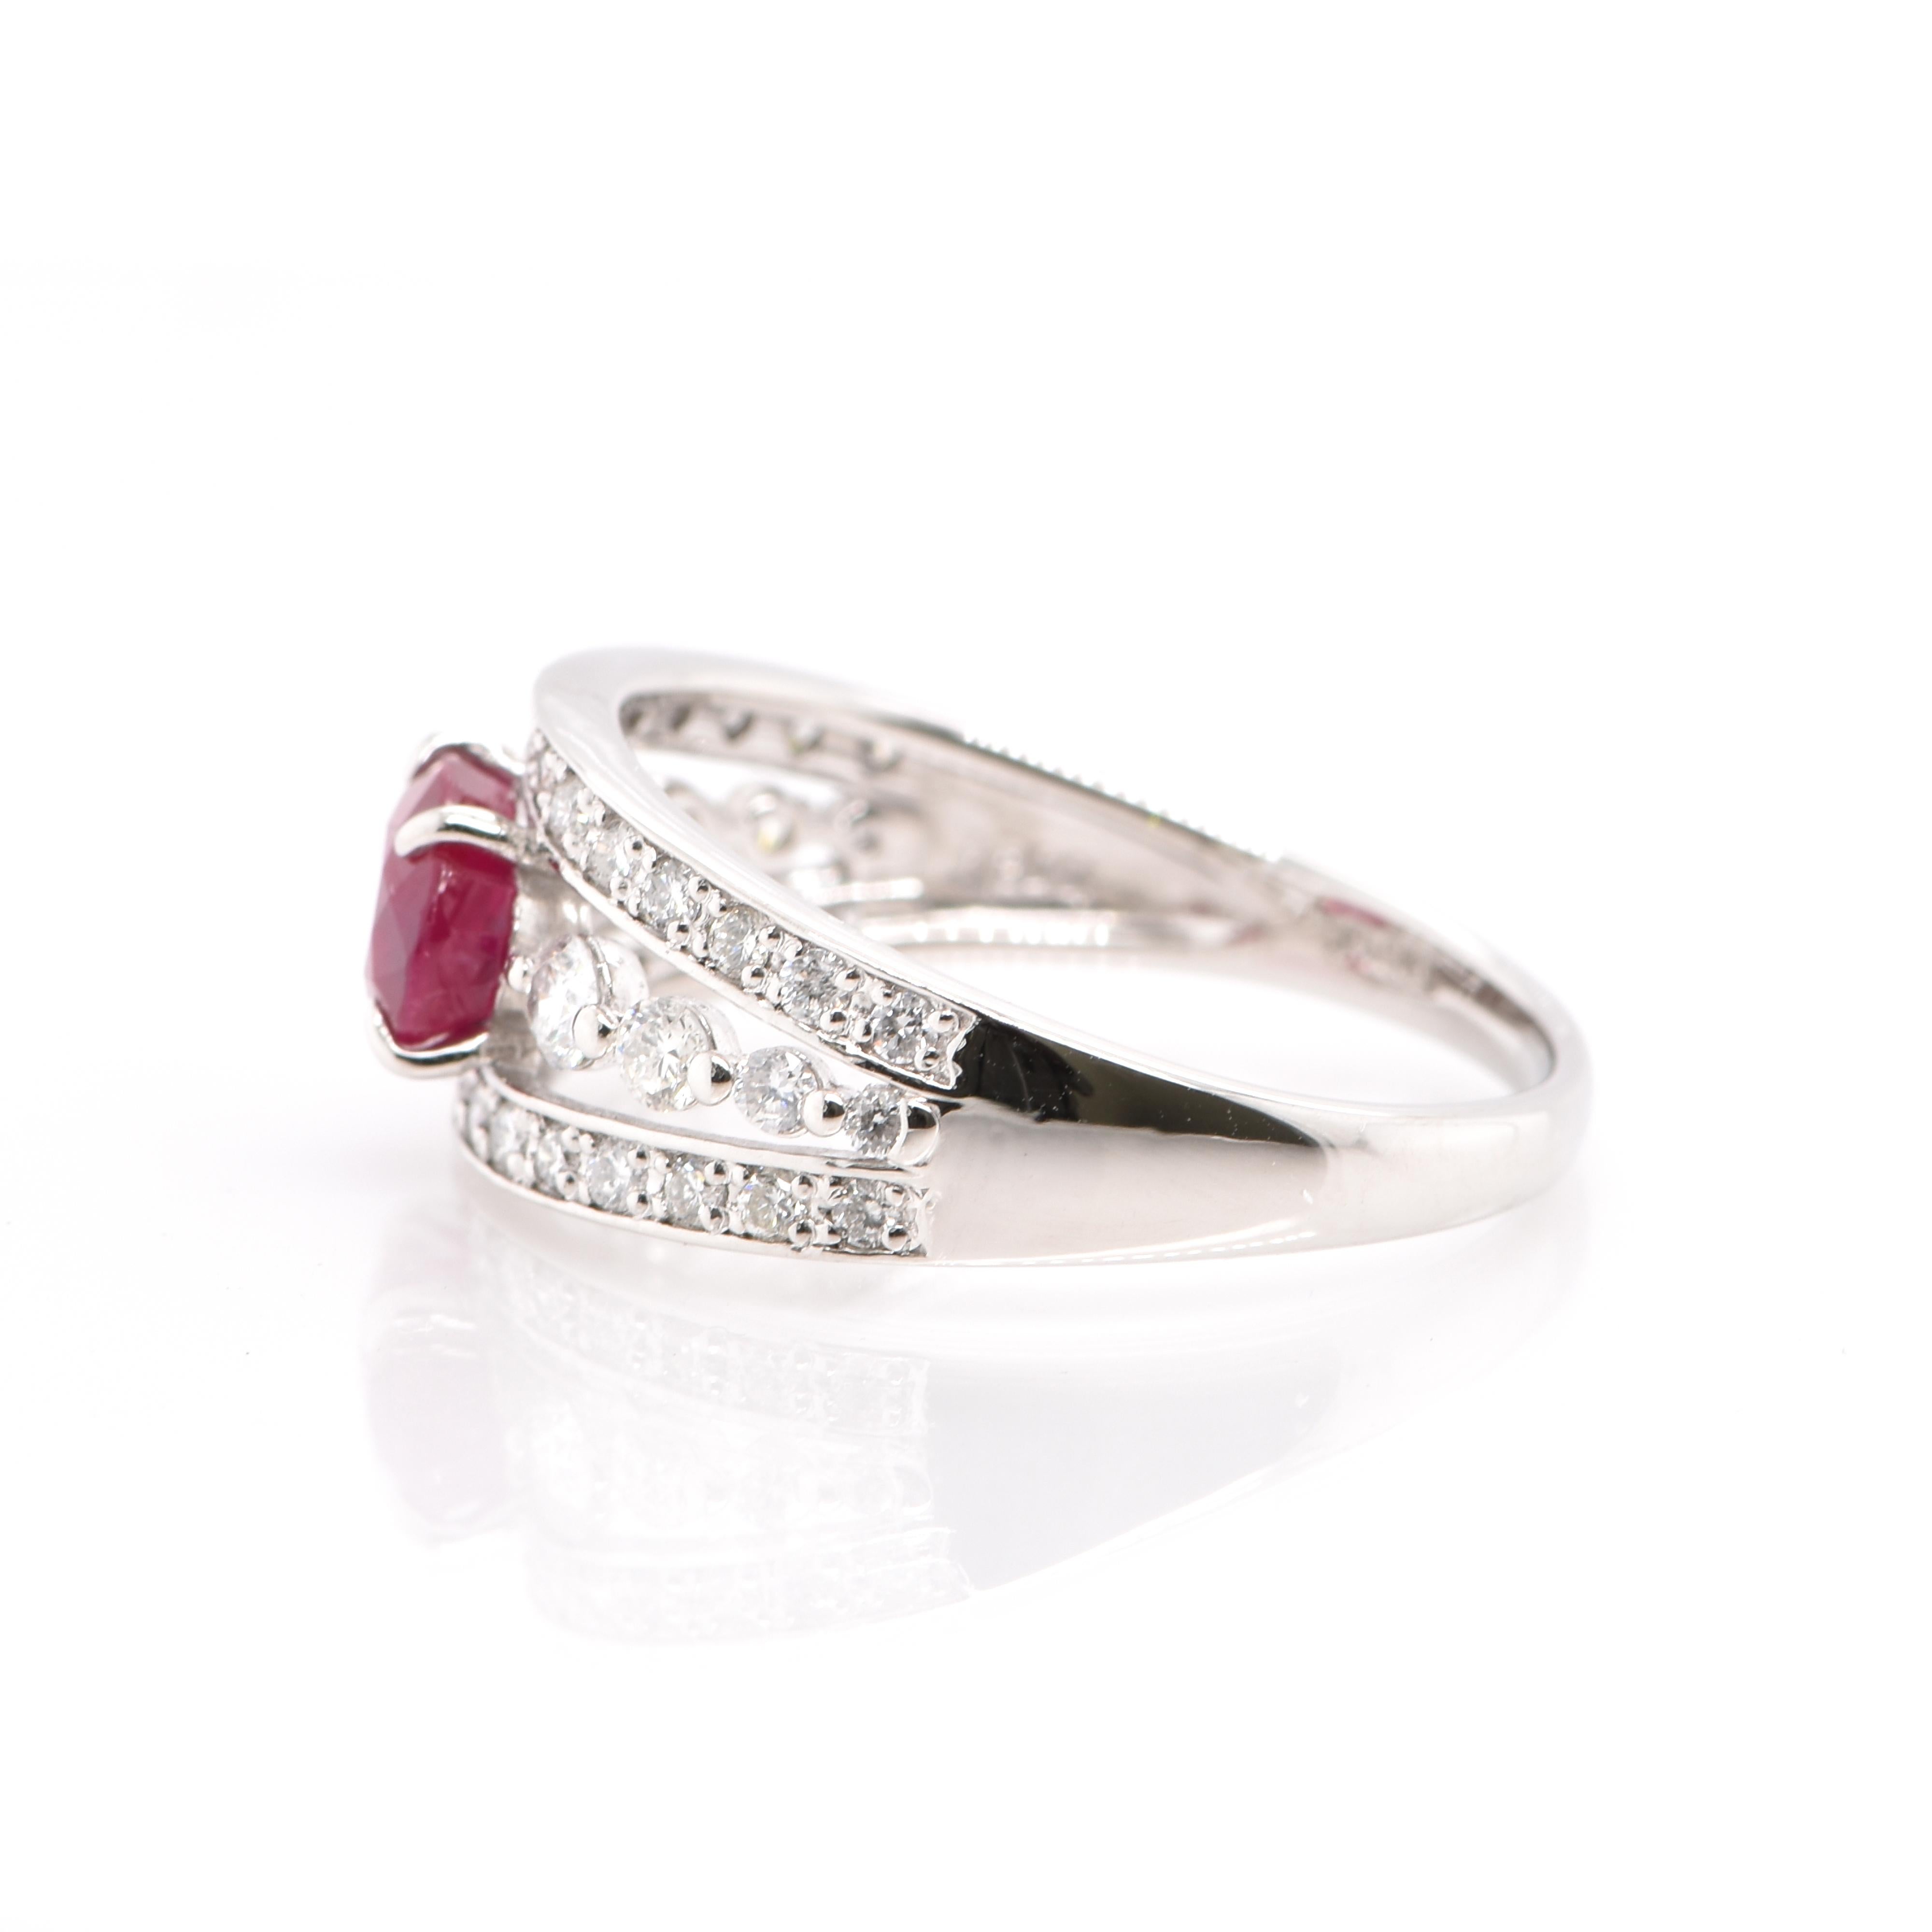 Oval Cut 1.34 Carat, Natural Ruby and Diamond Ring Set in Platinum